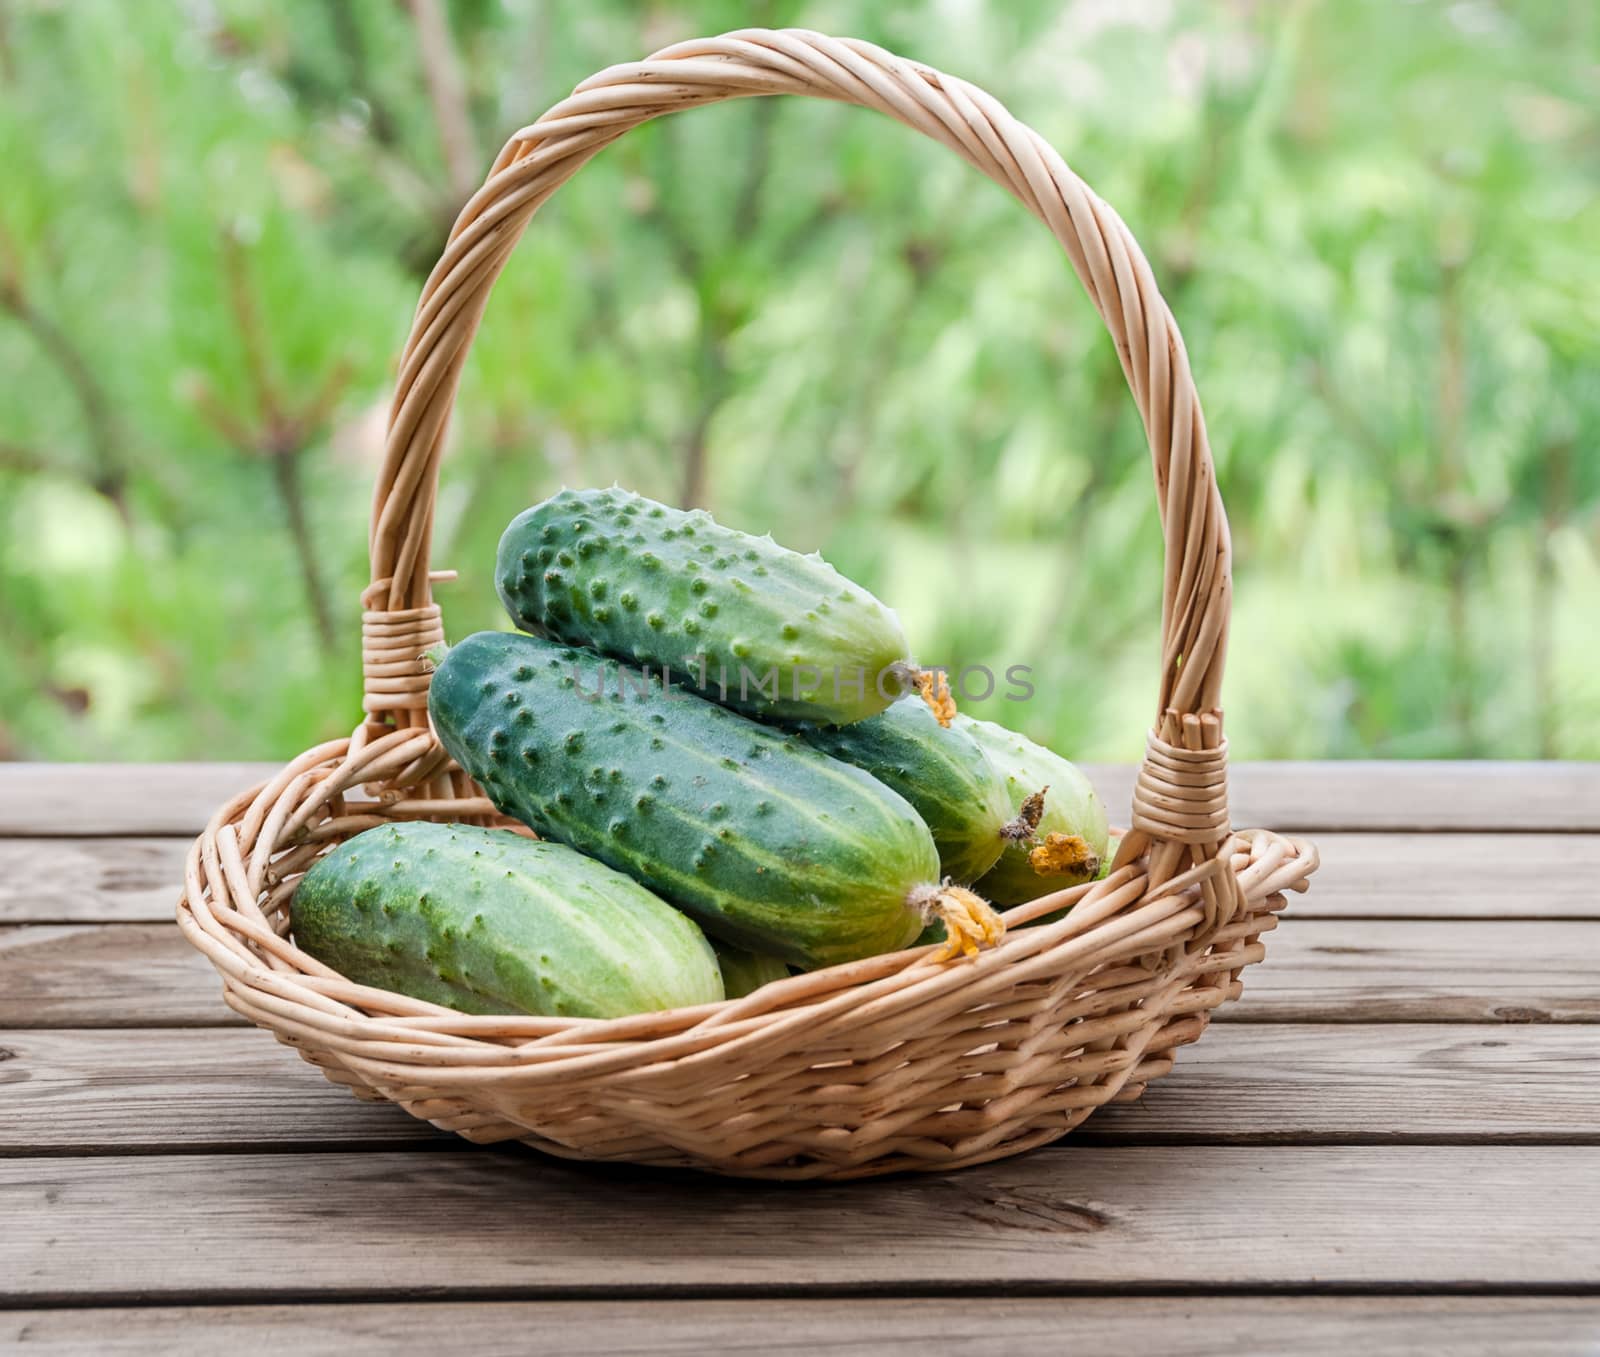 Cucumbers in a basket on a background of nature